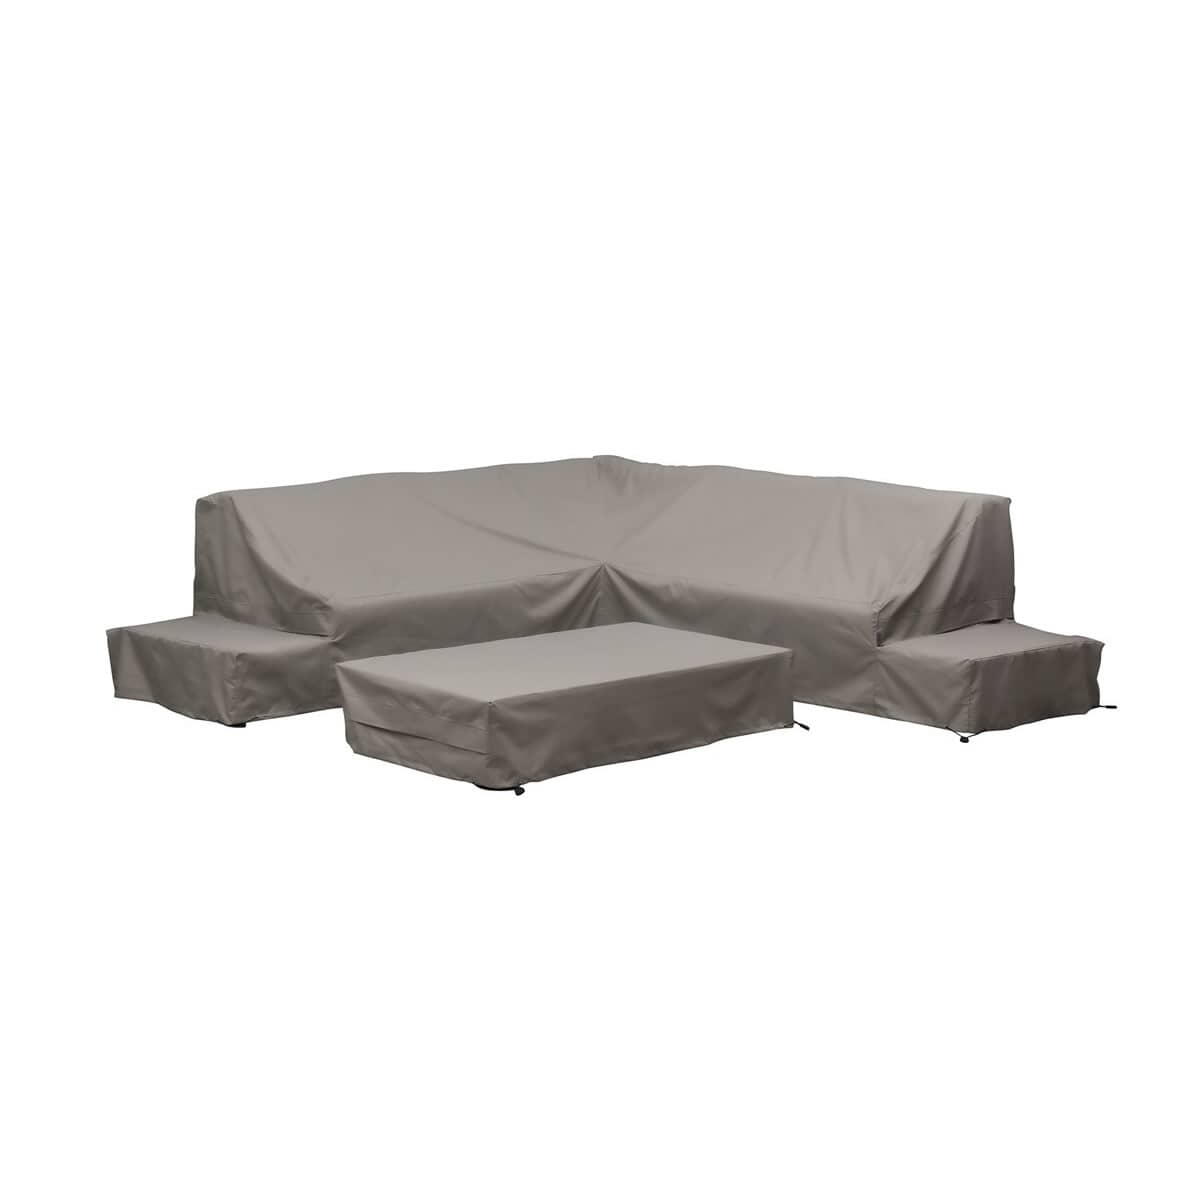 Bramblecrest Vienna Corner Sofa with Rectangle Coffee Table Covers